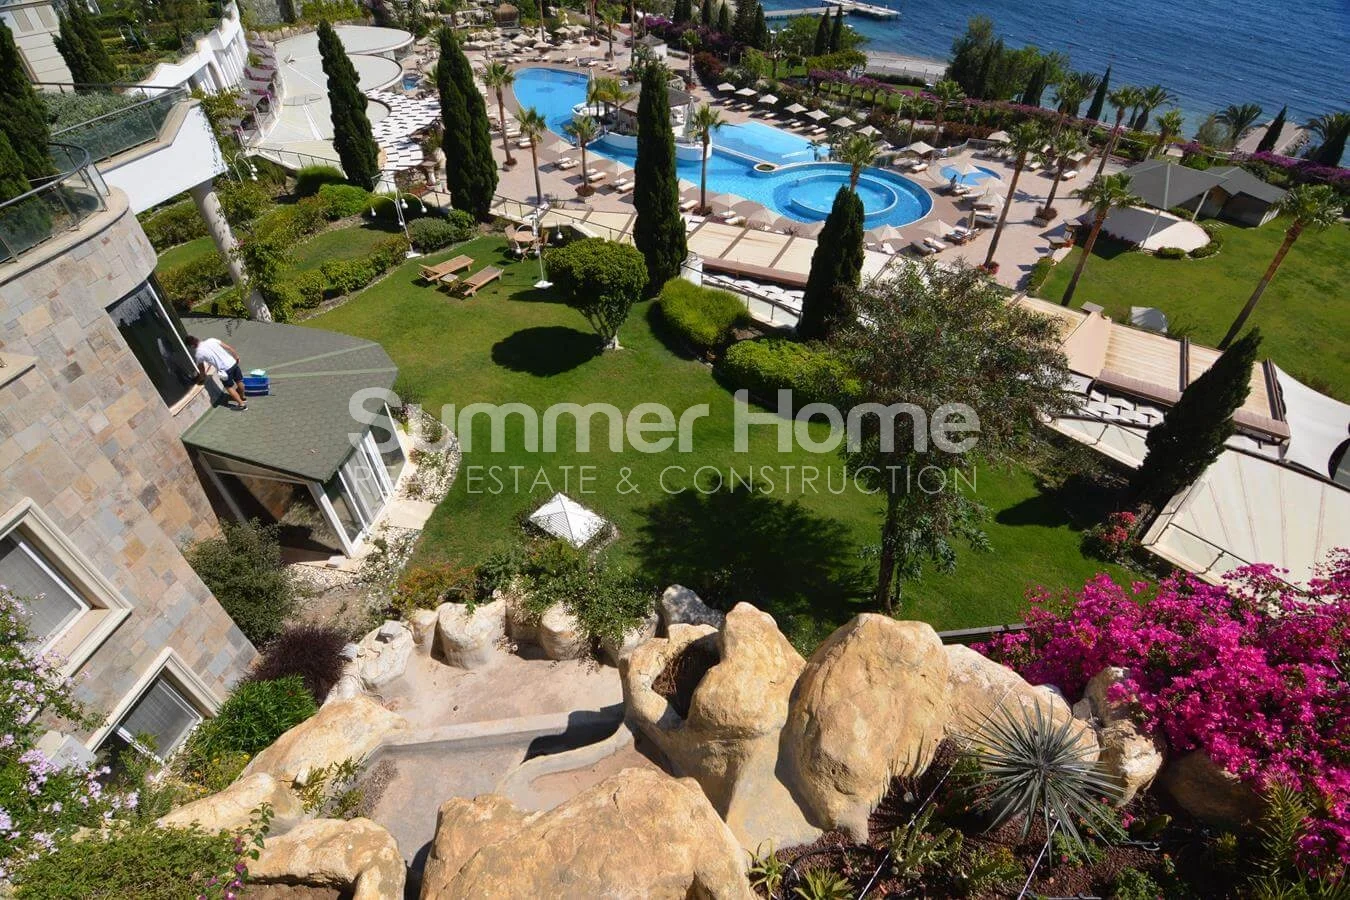 Various apartments in an exclusive complex in Gumusluk, Bodrum general - 7